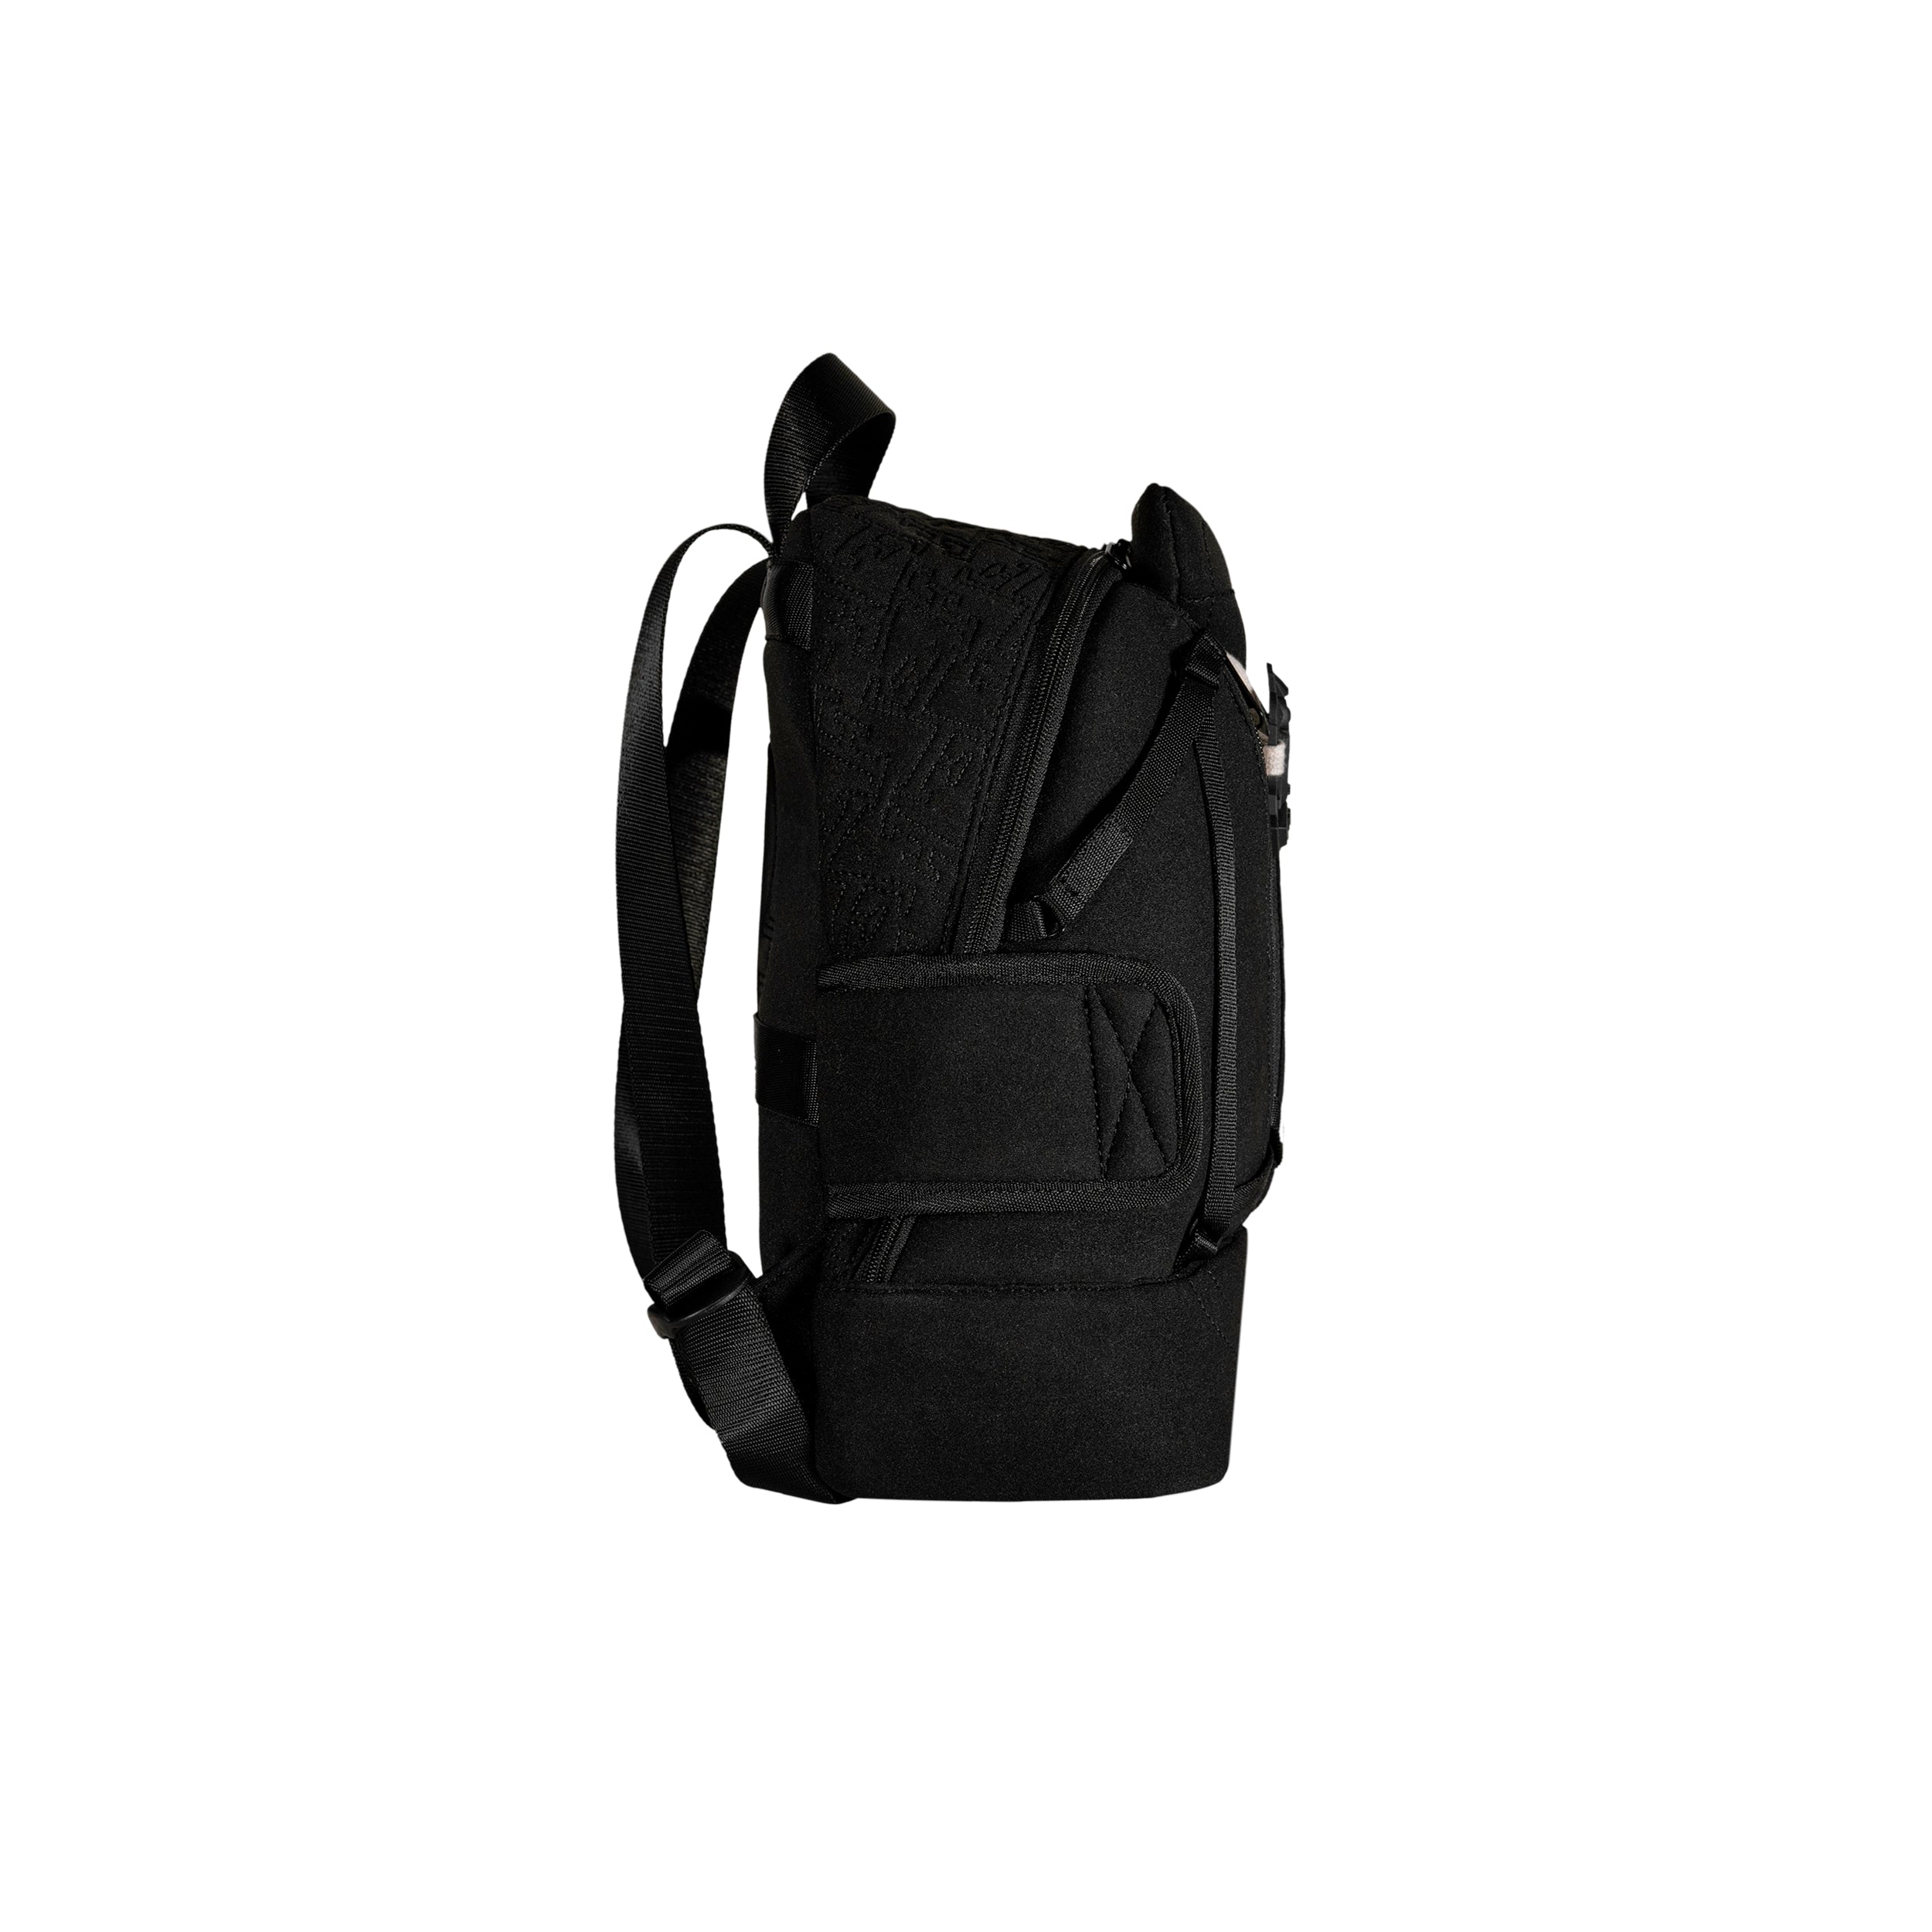 FRONT Queening The Pawn Backpack SB22 - BLACK - S